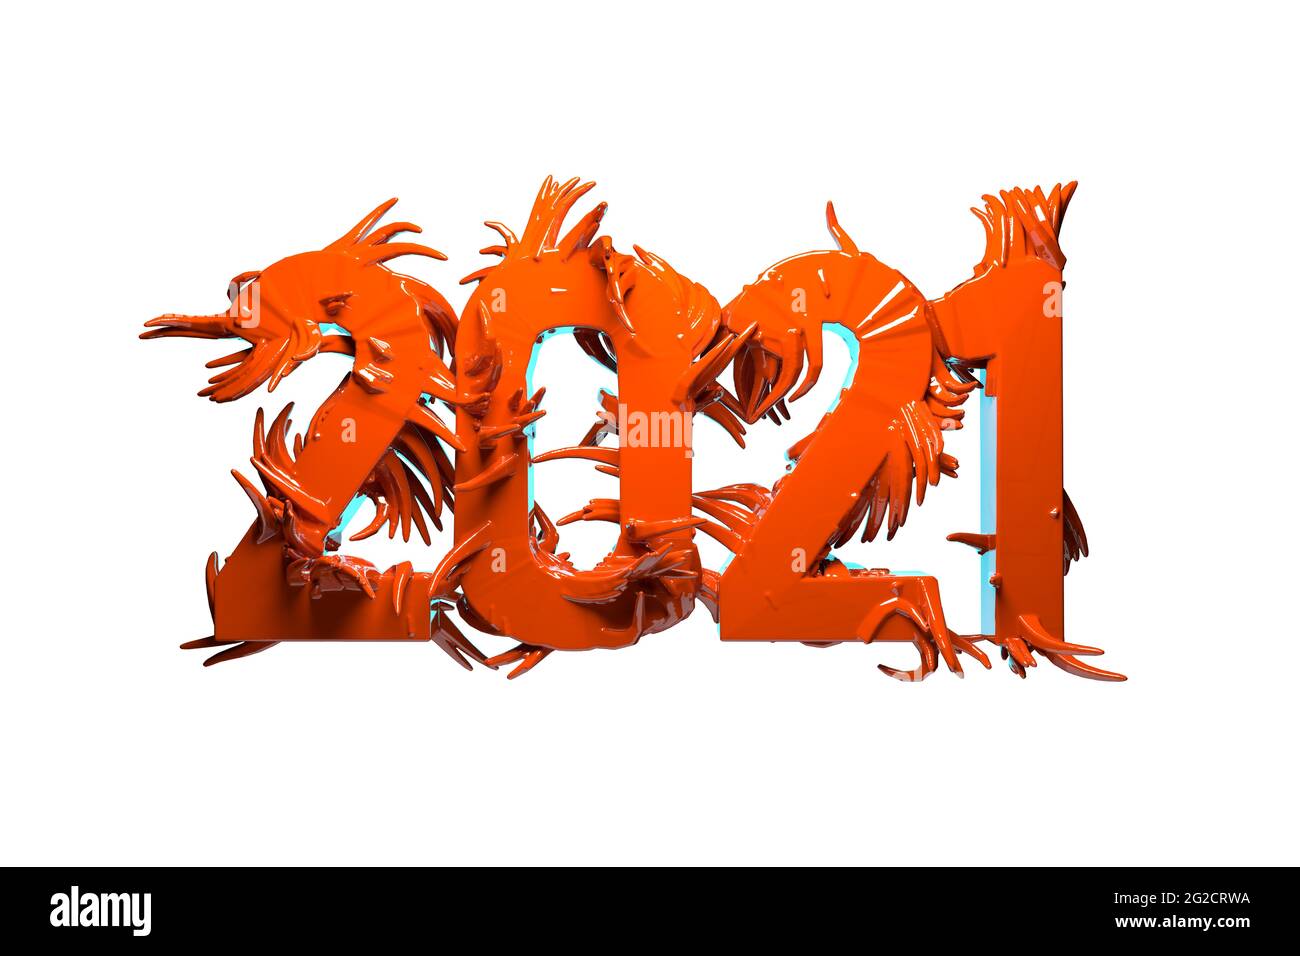 Happiness for the New Year 2021 lettering made by red glossy plastic or metal. The surface is covered with sharp spikes Isolated on white background Stock Photo